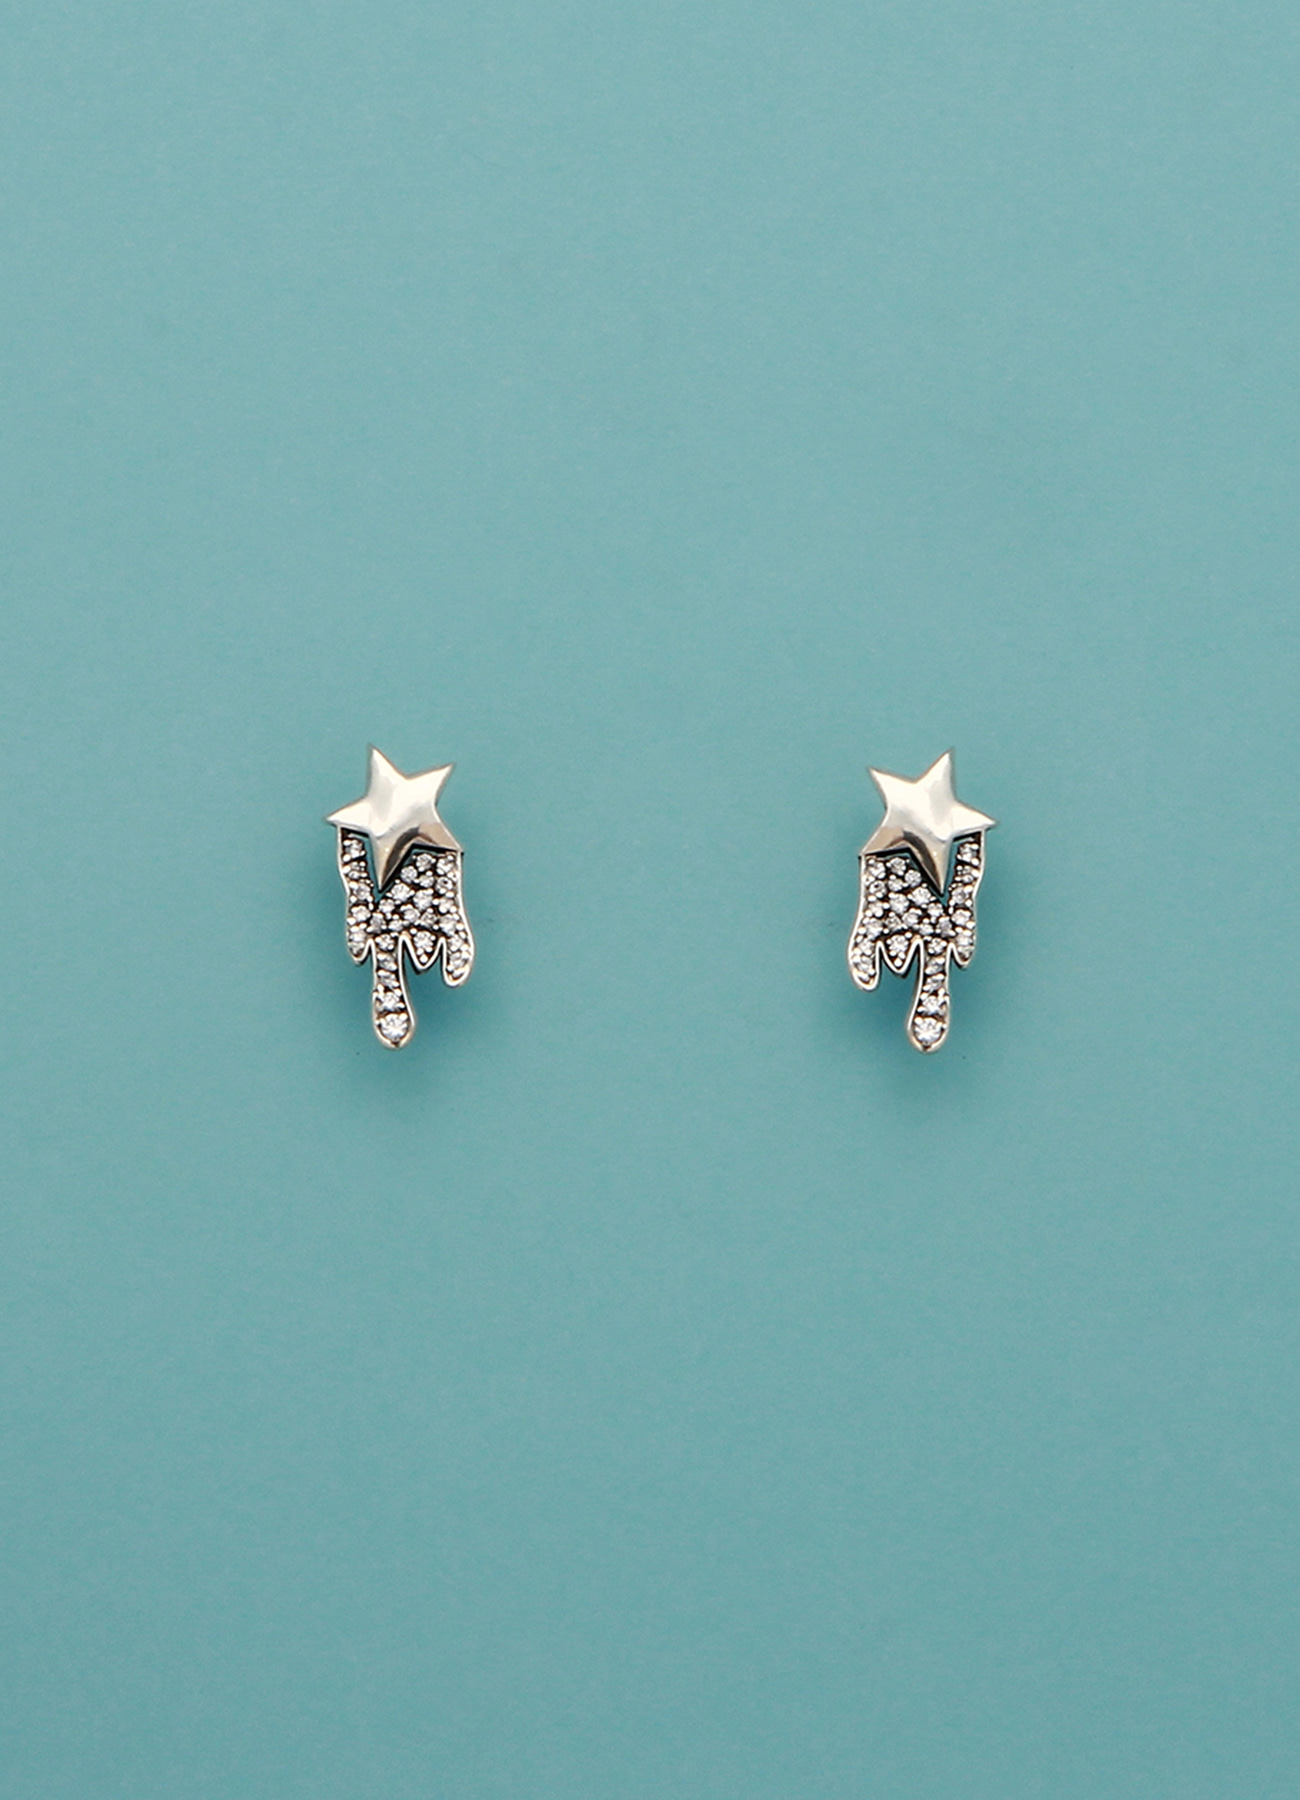 Crying Star Silver925 Earrings